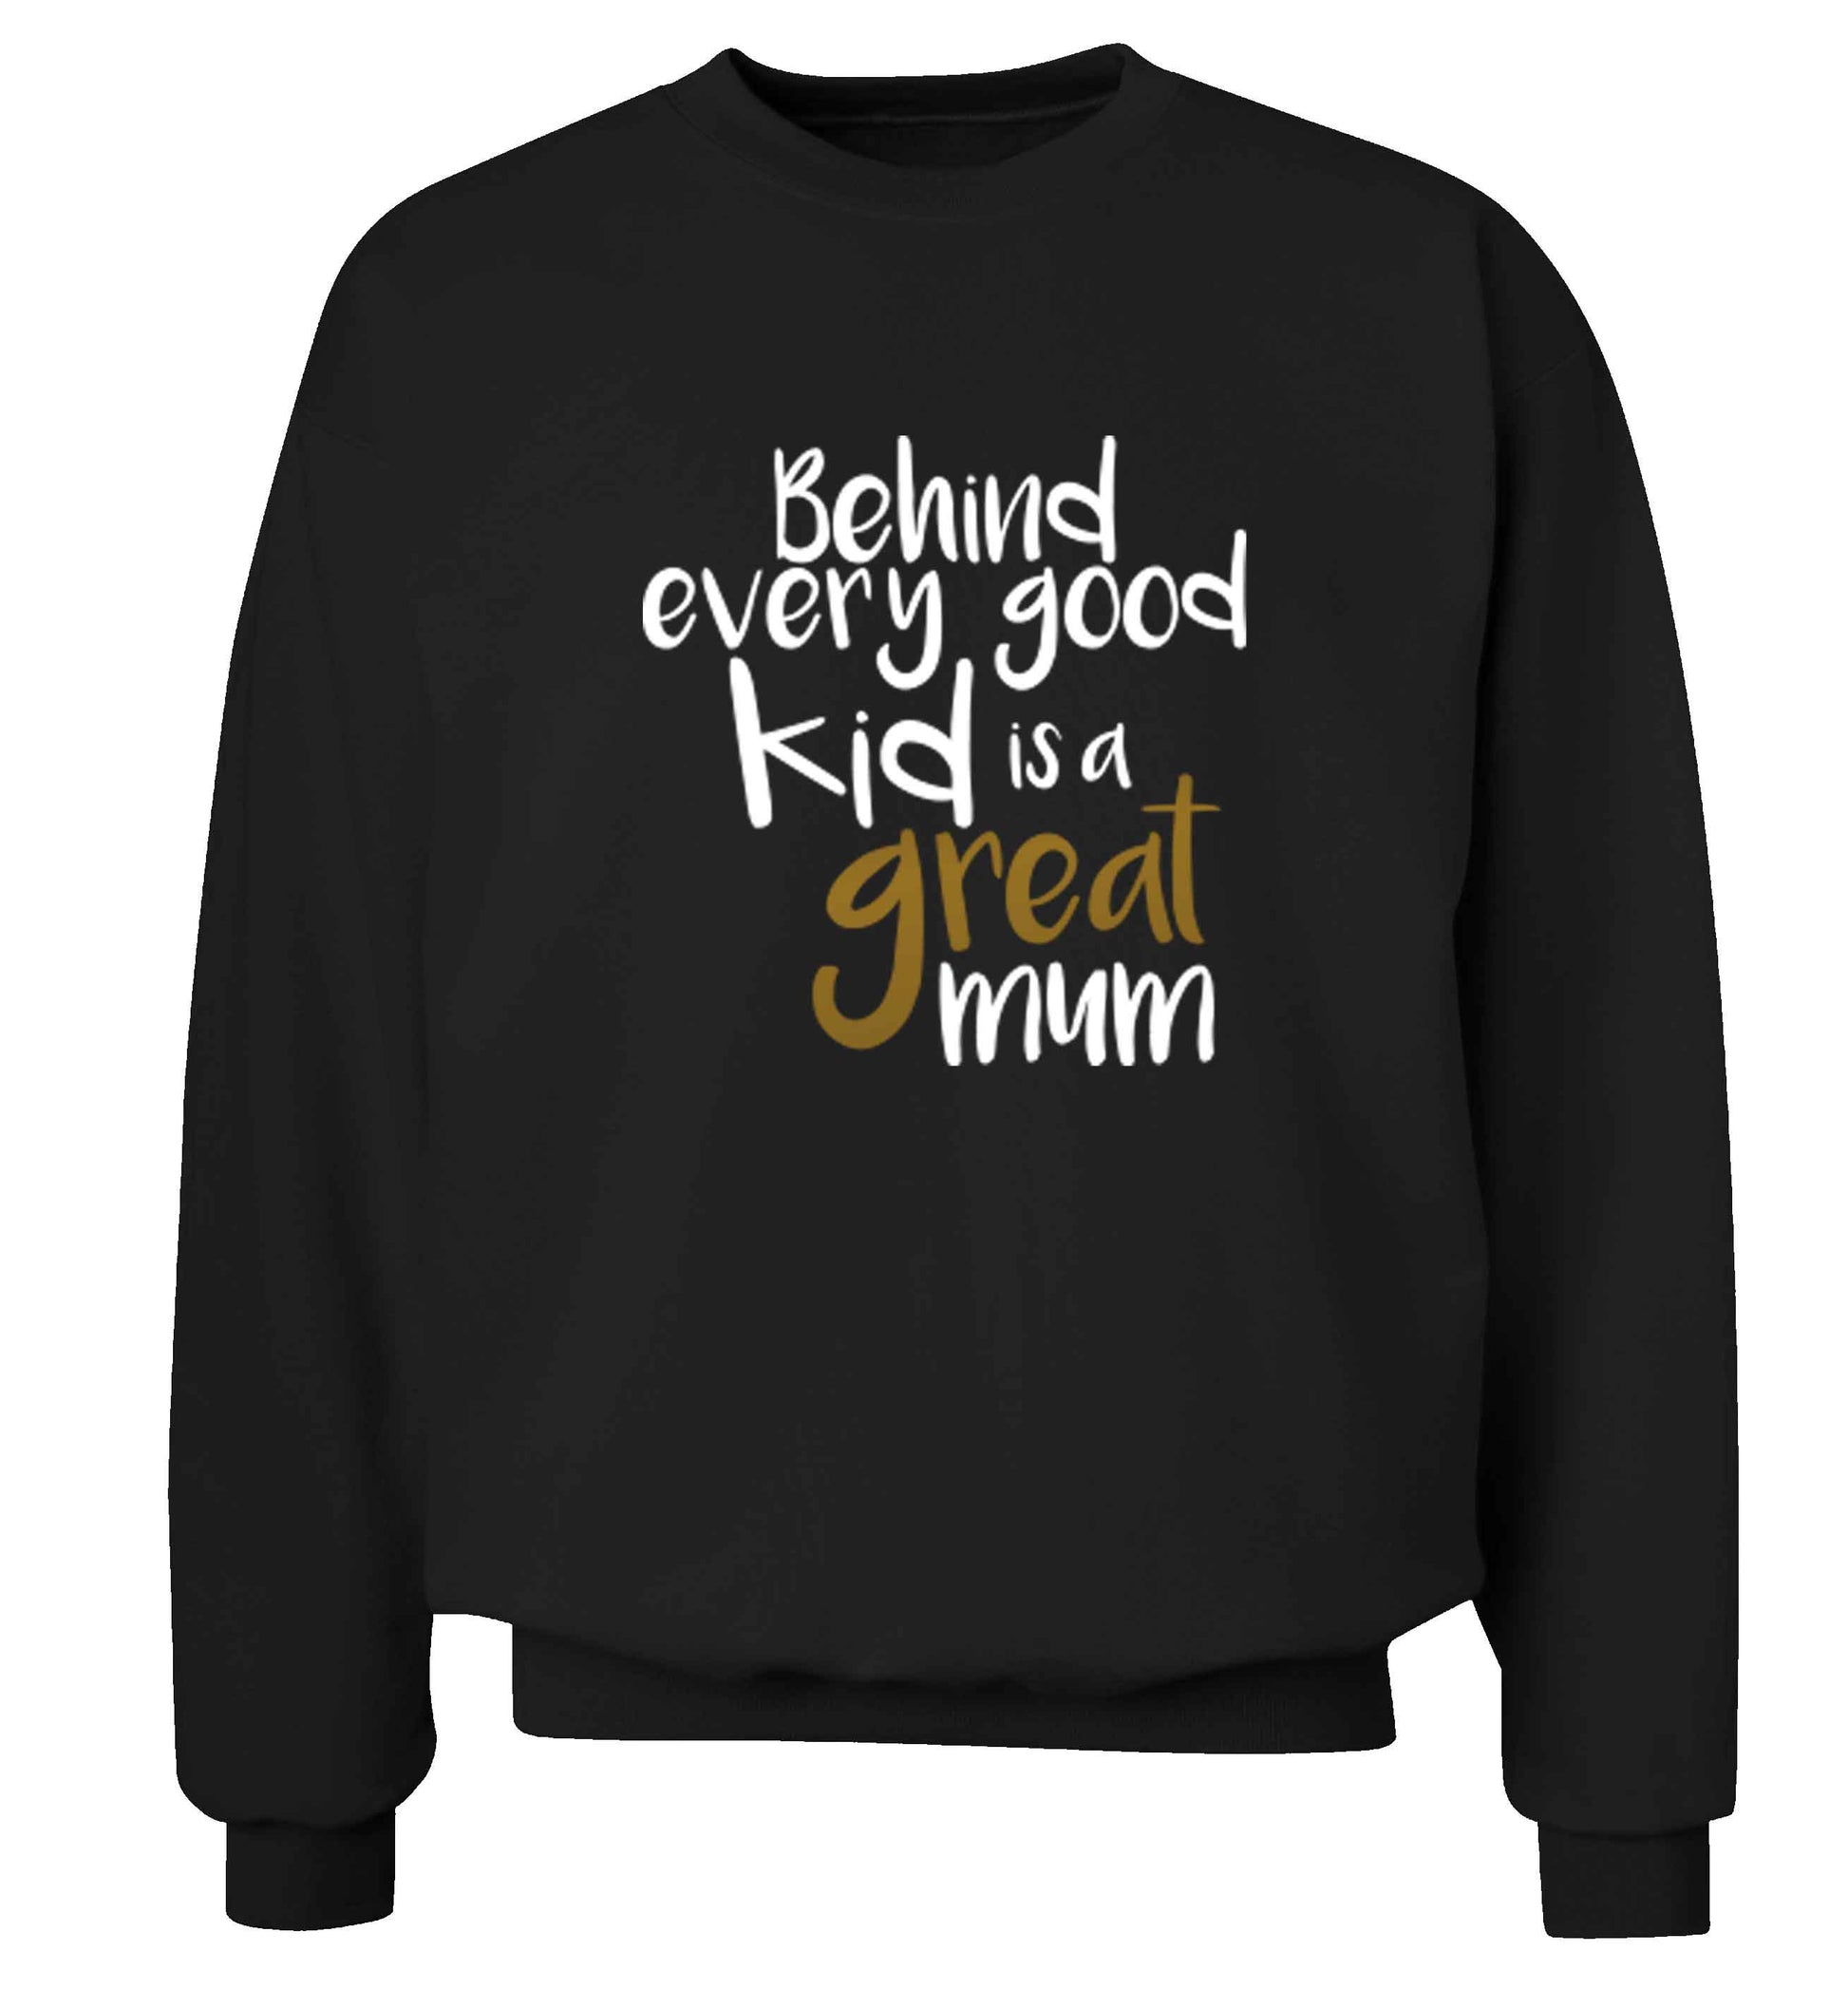 Behind every good kid is a great mum adult's unisex black sweater 2XL